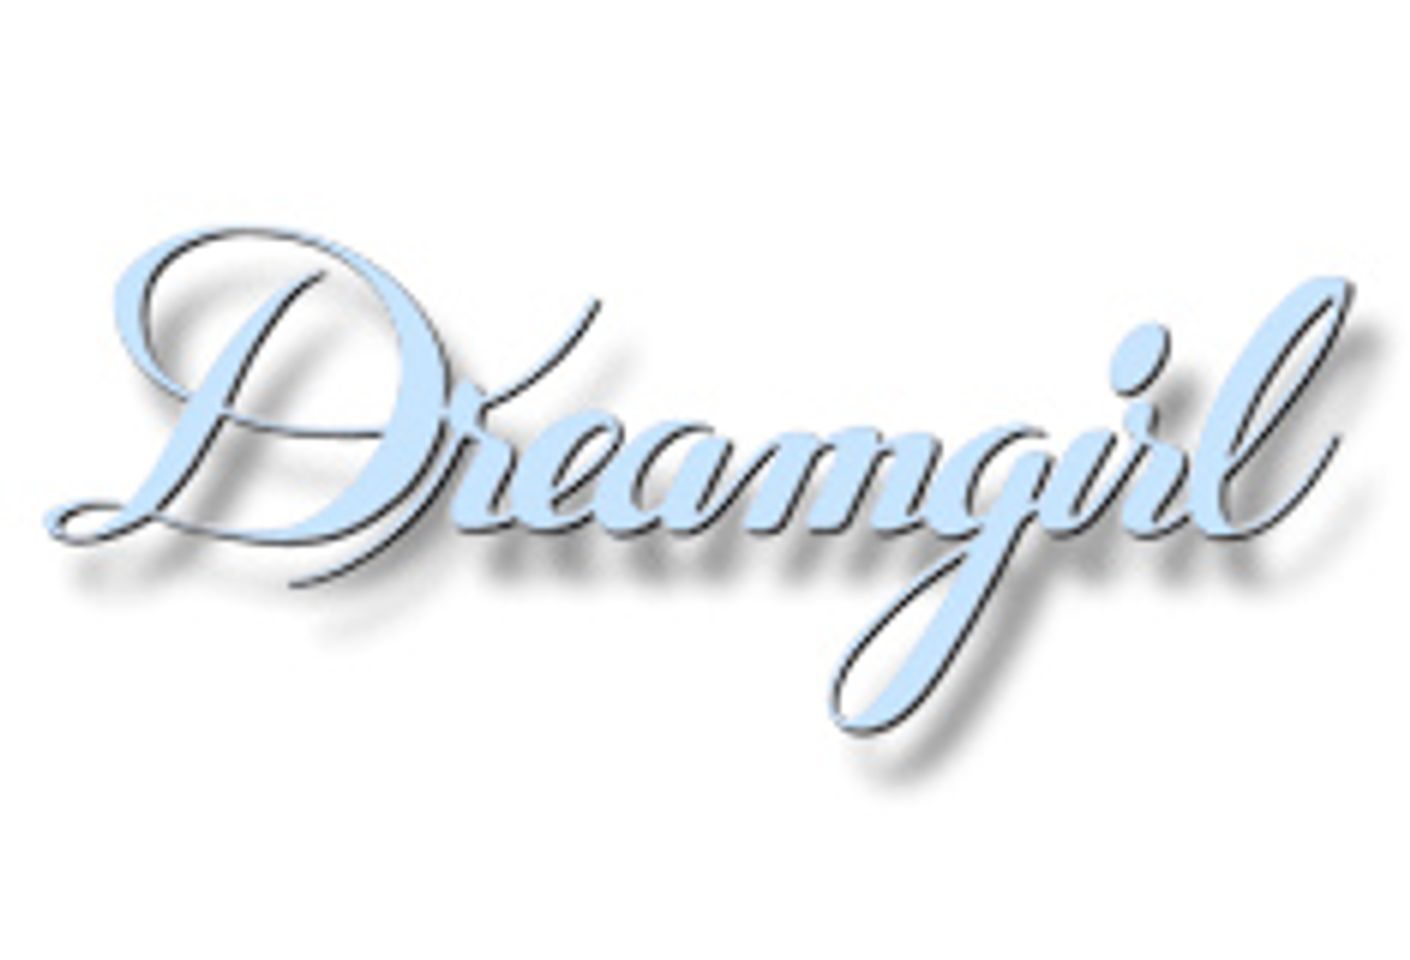 Dreamgirl Debuts 2008/2009 Diamond Collection of Packaged Lingerie Styles